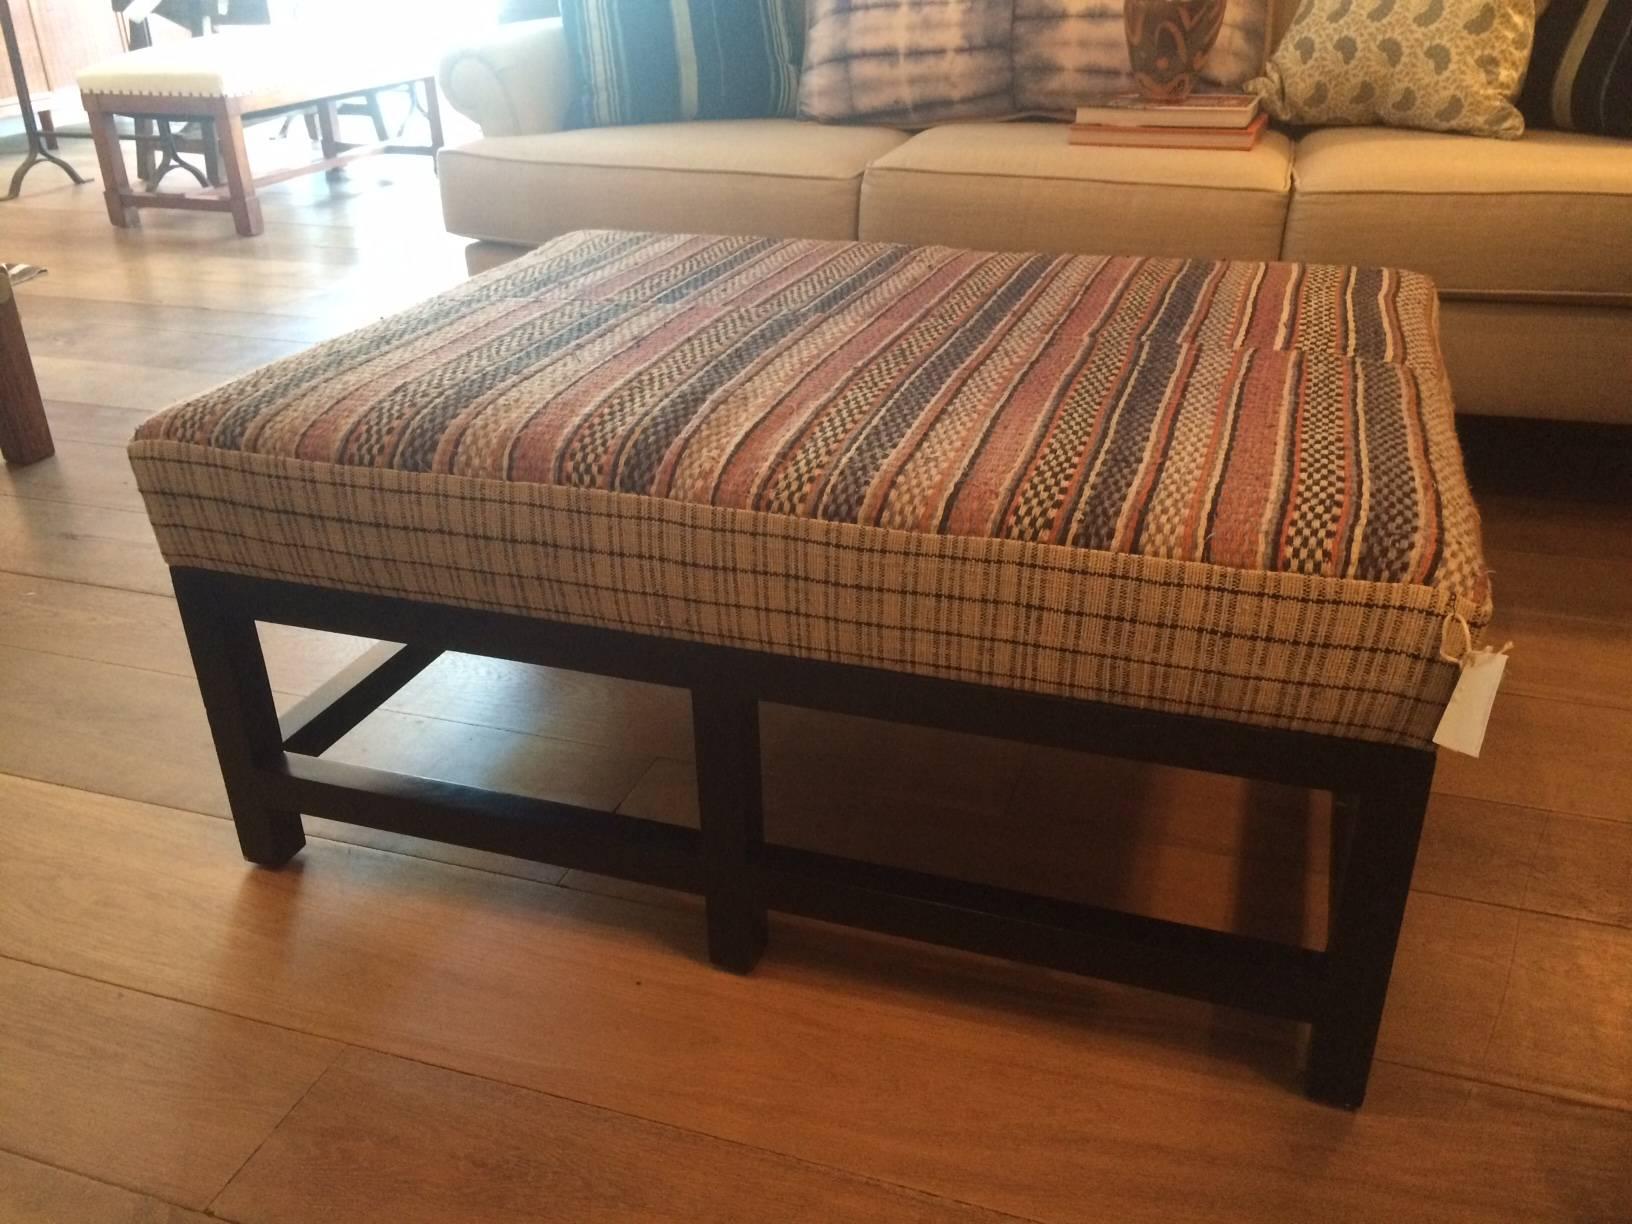 Other Large Ottoman by Nathan Turner, Upholstered with Vintage Mattress Fabric